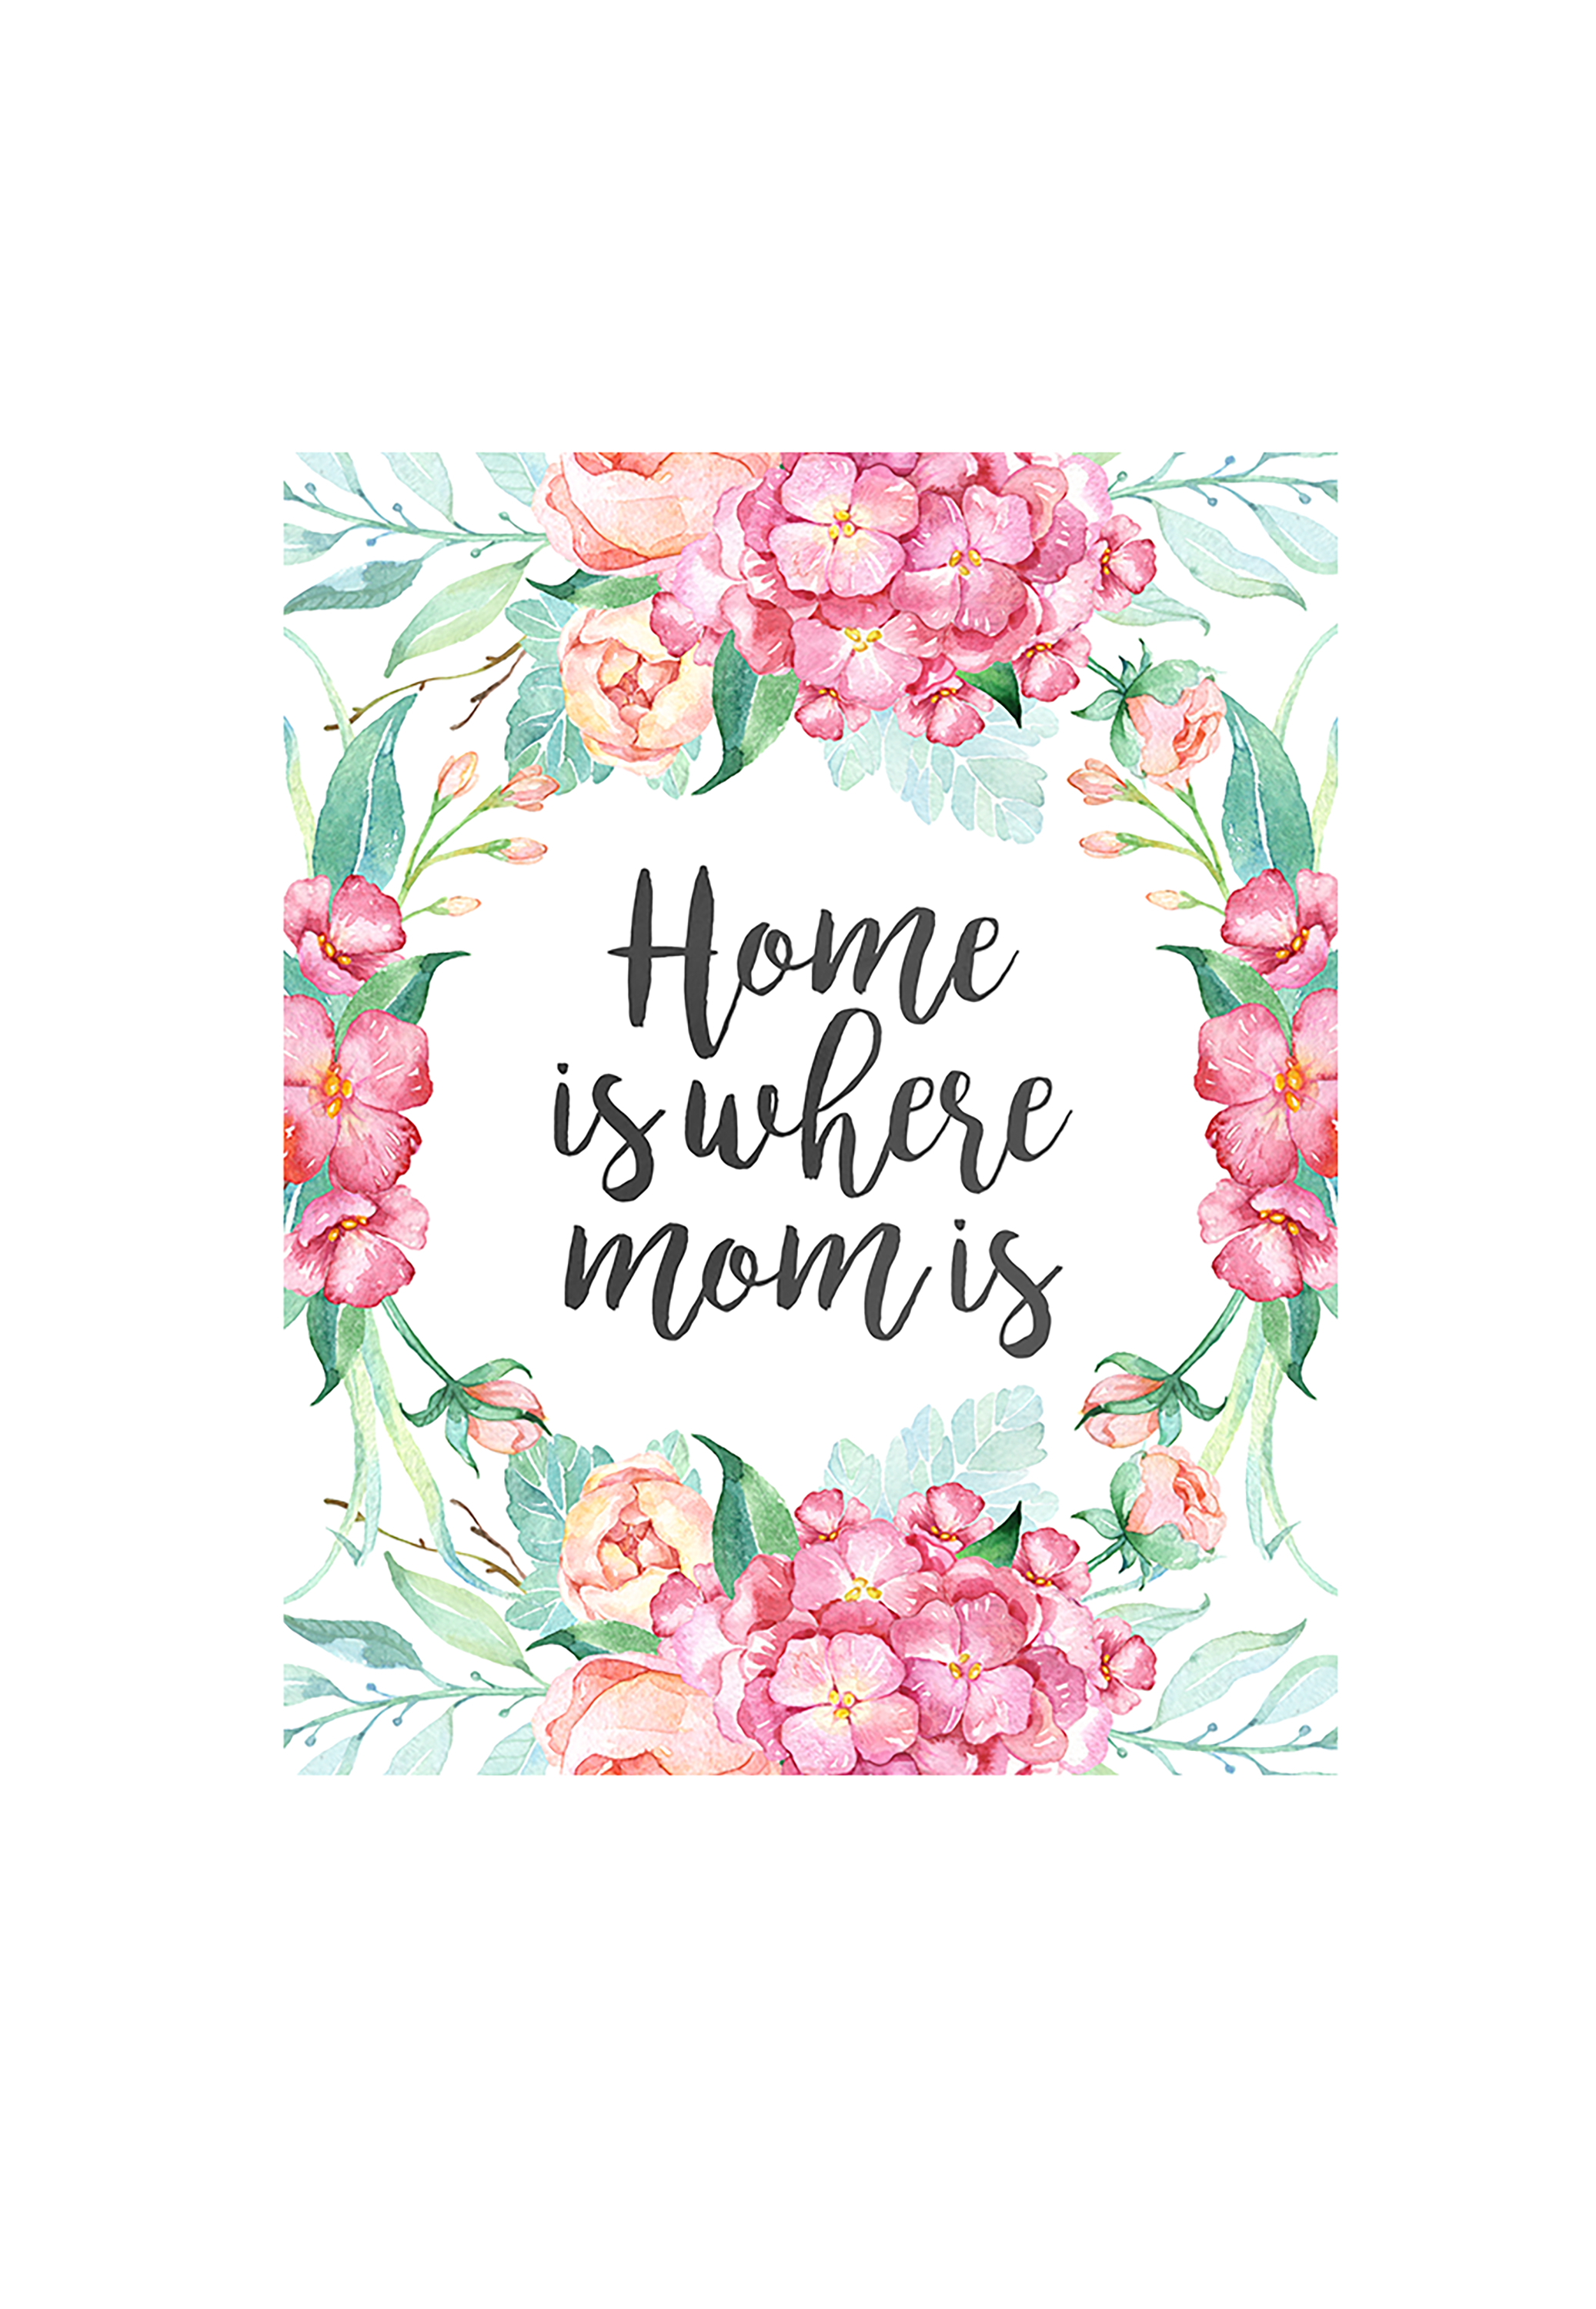 23 Mothers Day Cards - Free Printable Mother's Day Cards - Free Printable Mothers Day Card From Dog